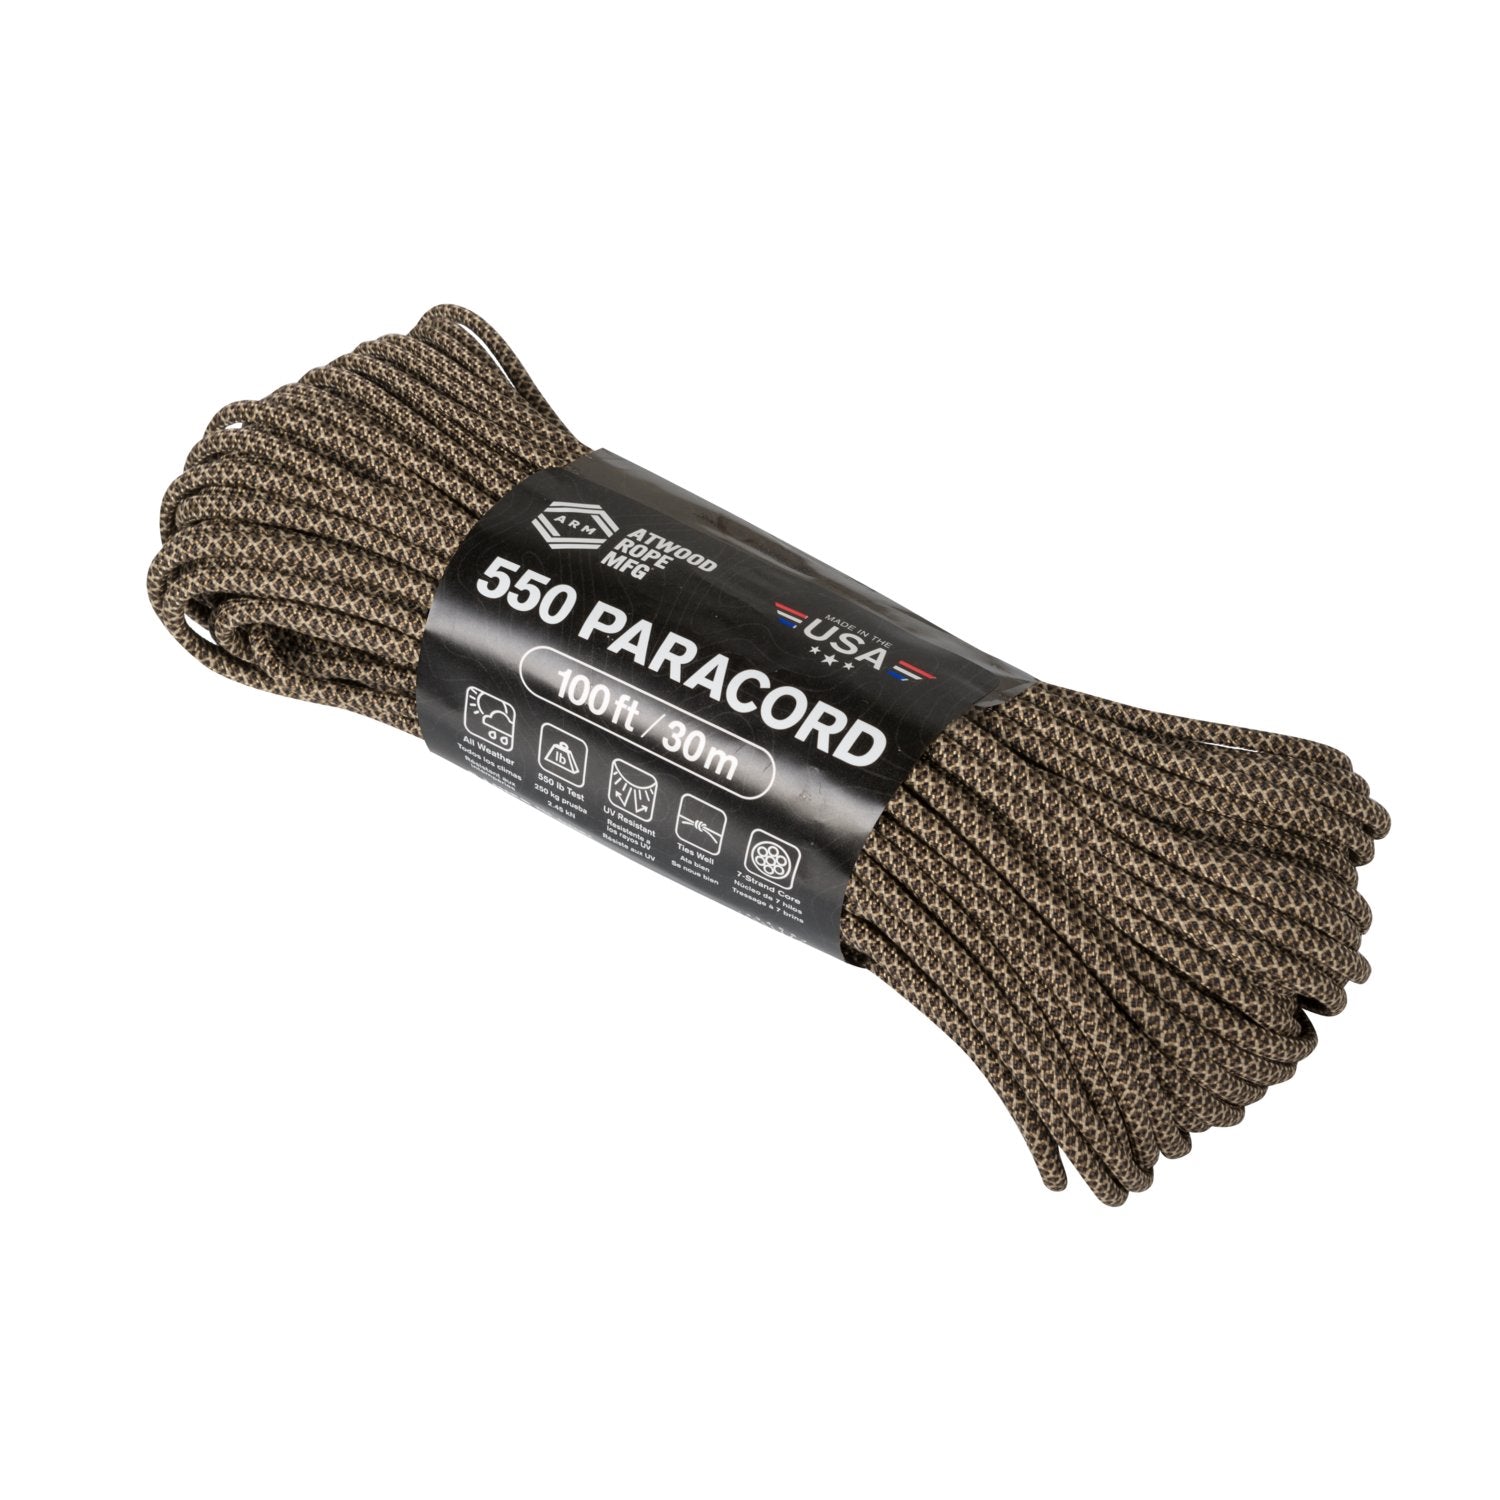 Atwood Rope MFG 550 Paracord (100 ft) Hyena